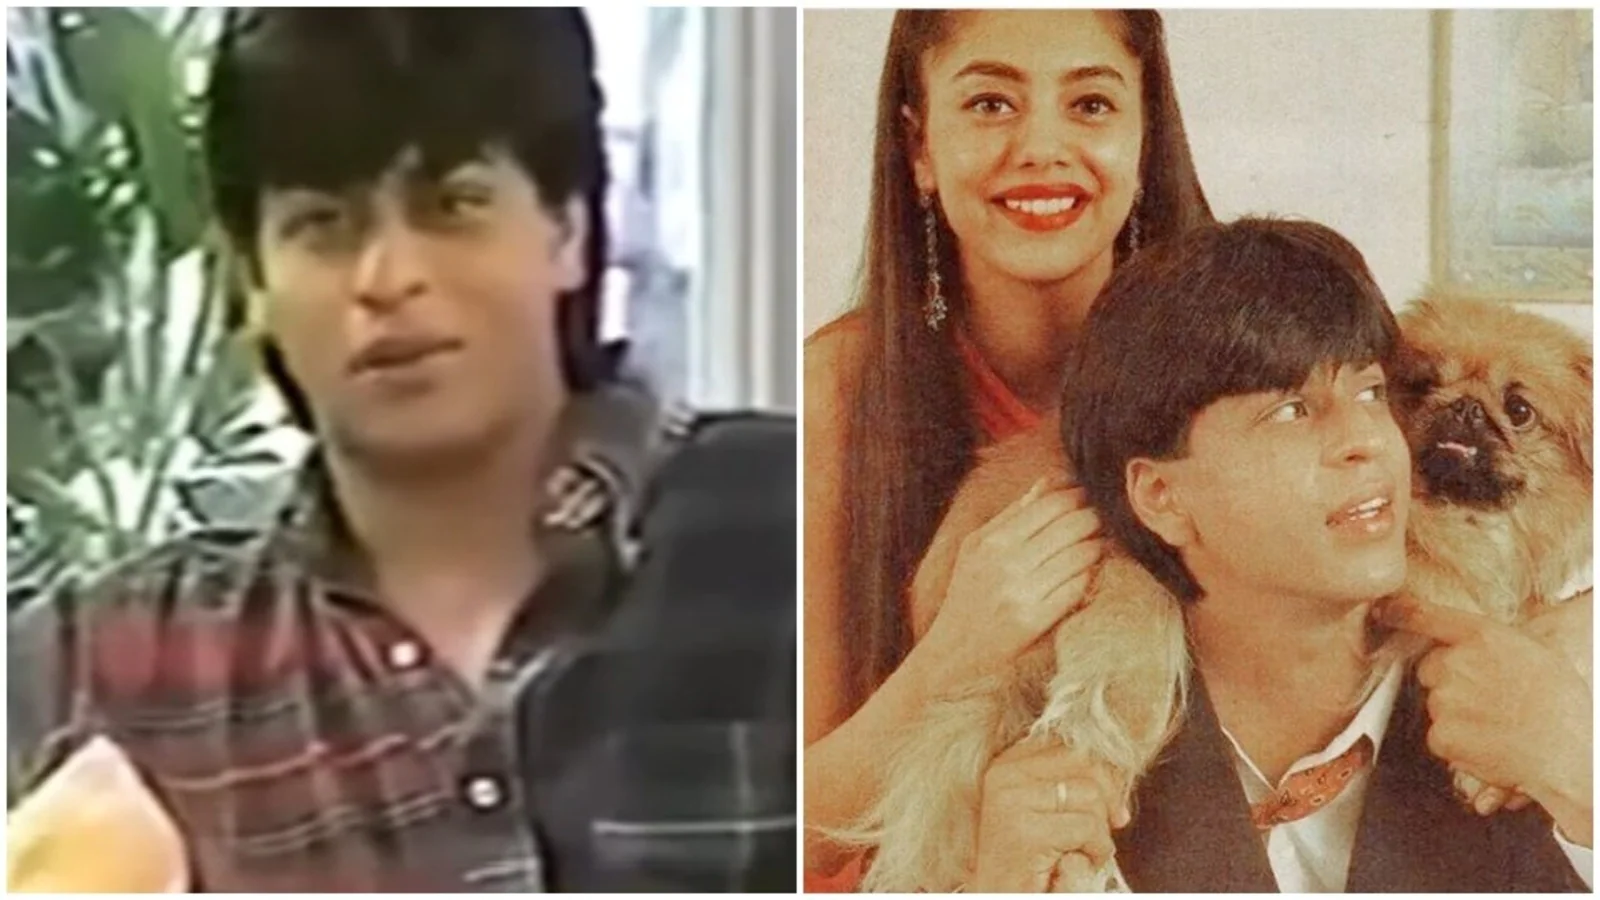 Watch Shah Rukh Khan describe typical Sunday with Gauri Khan, going to discos in vintage video: ‘Usko nachna pasand hai’